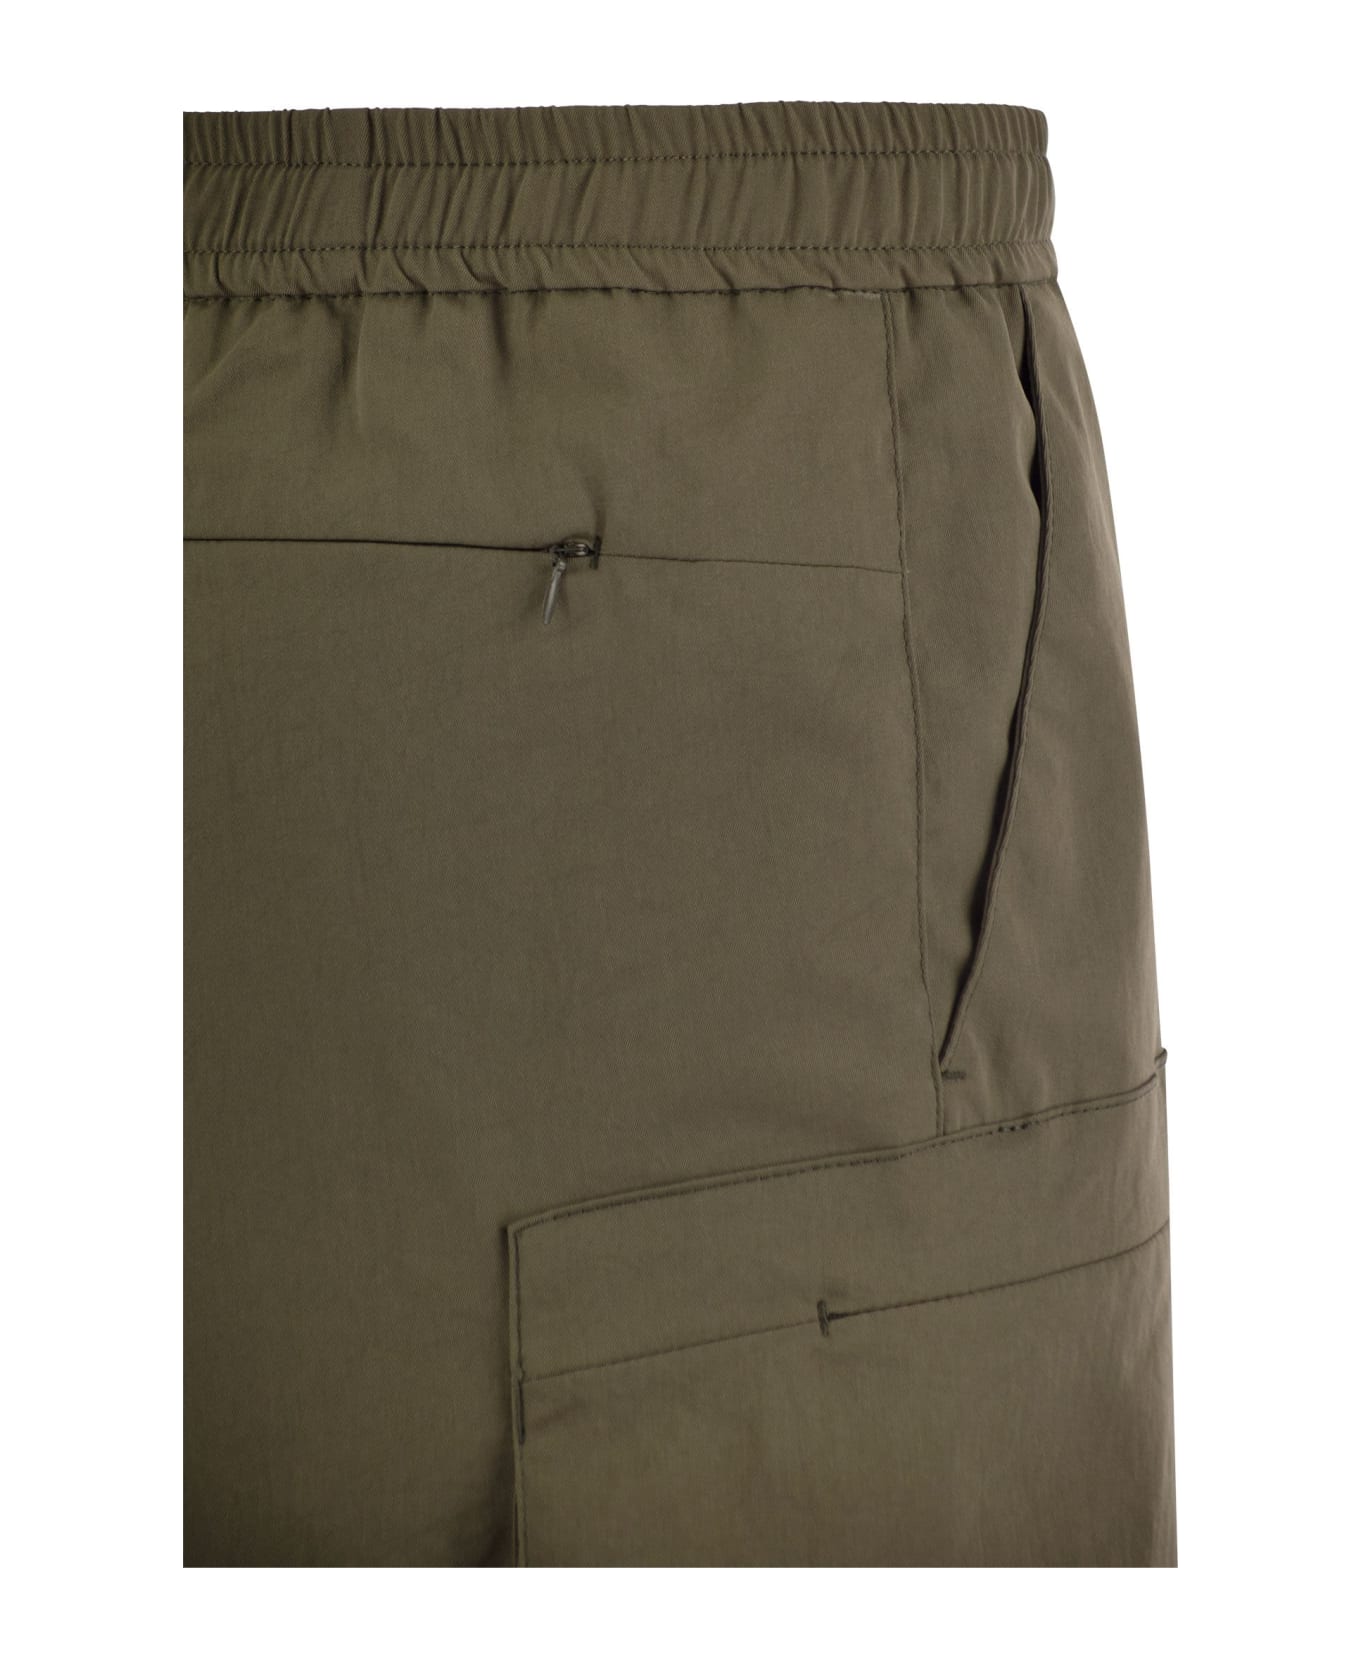 Colmar Bermuda Shorts In Technical Fabric With Drawstring - Military Green